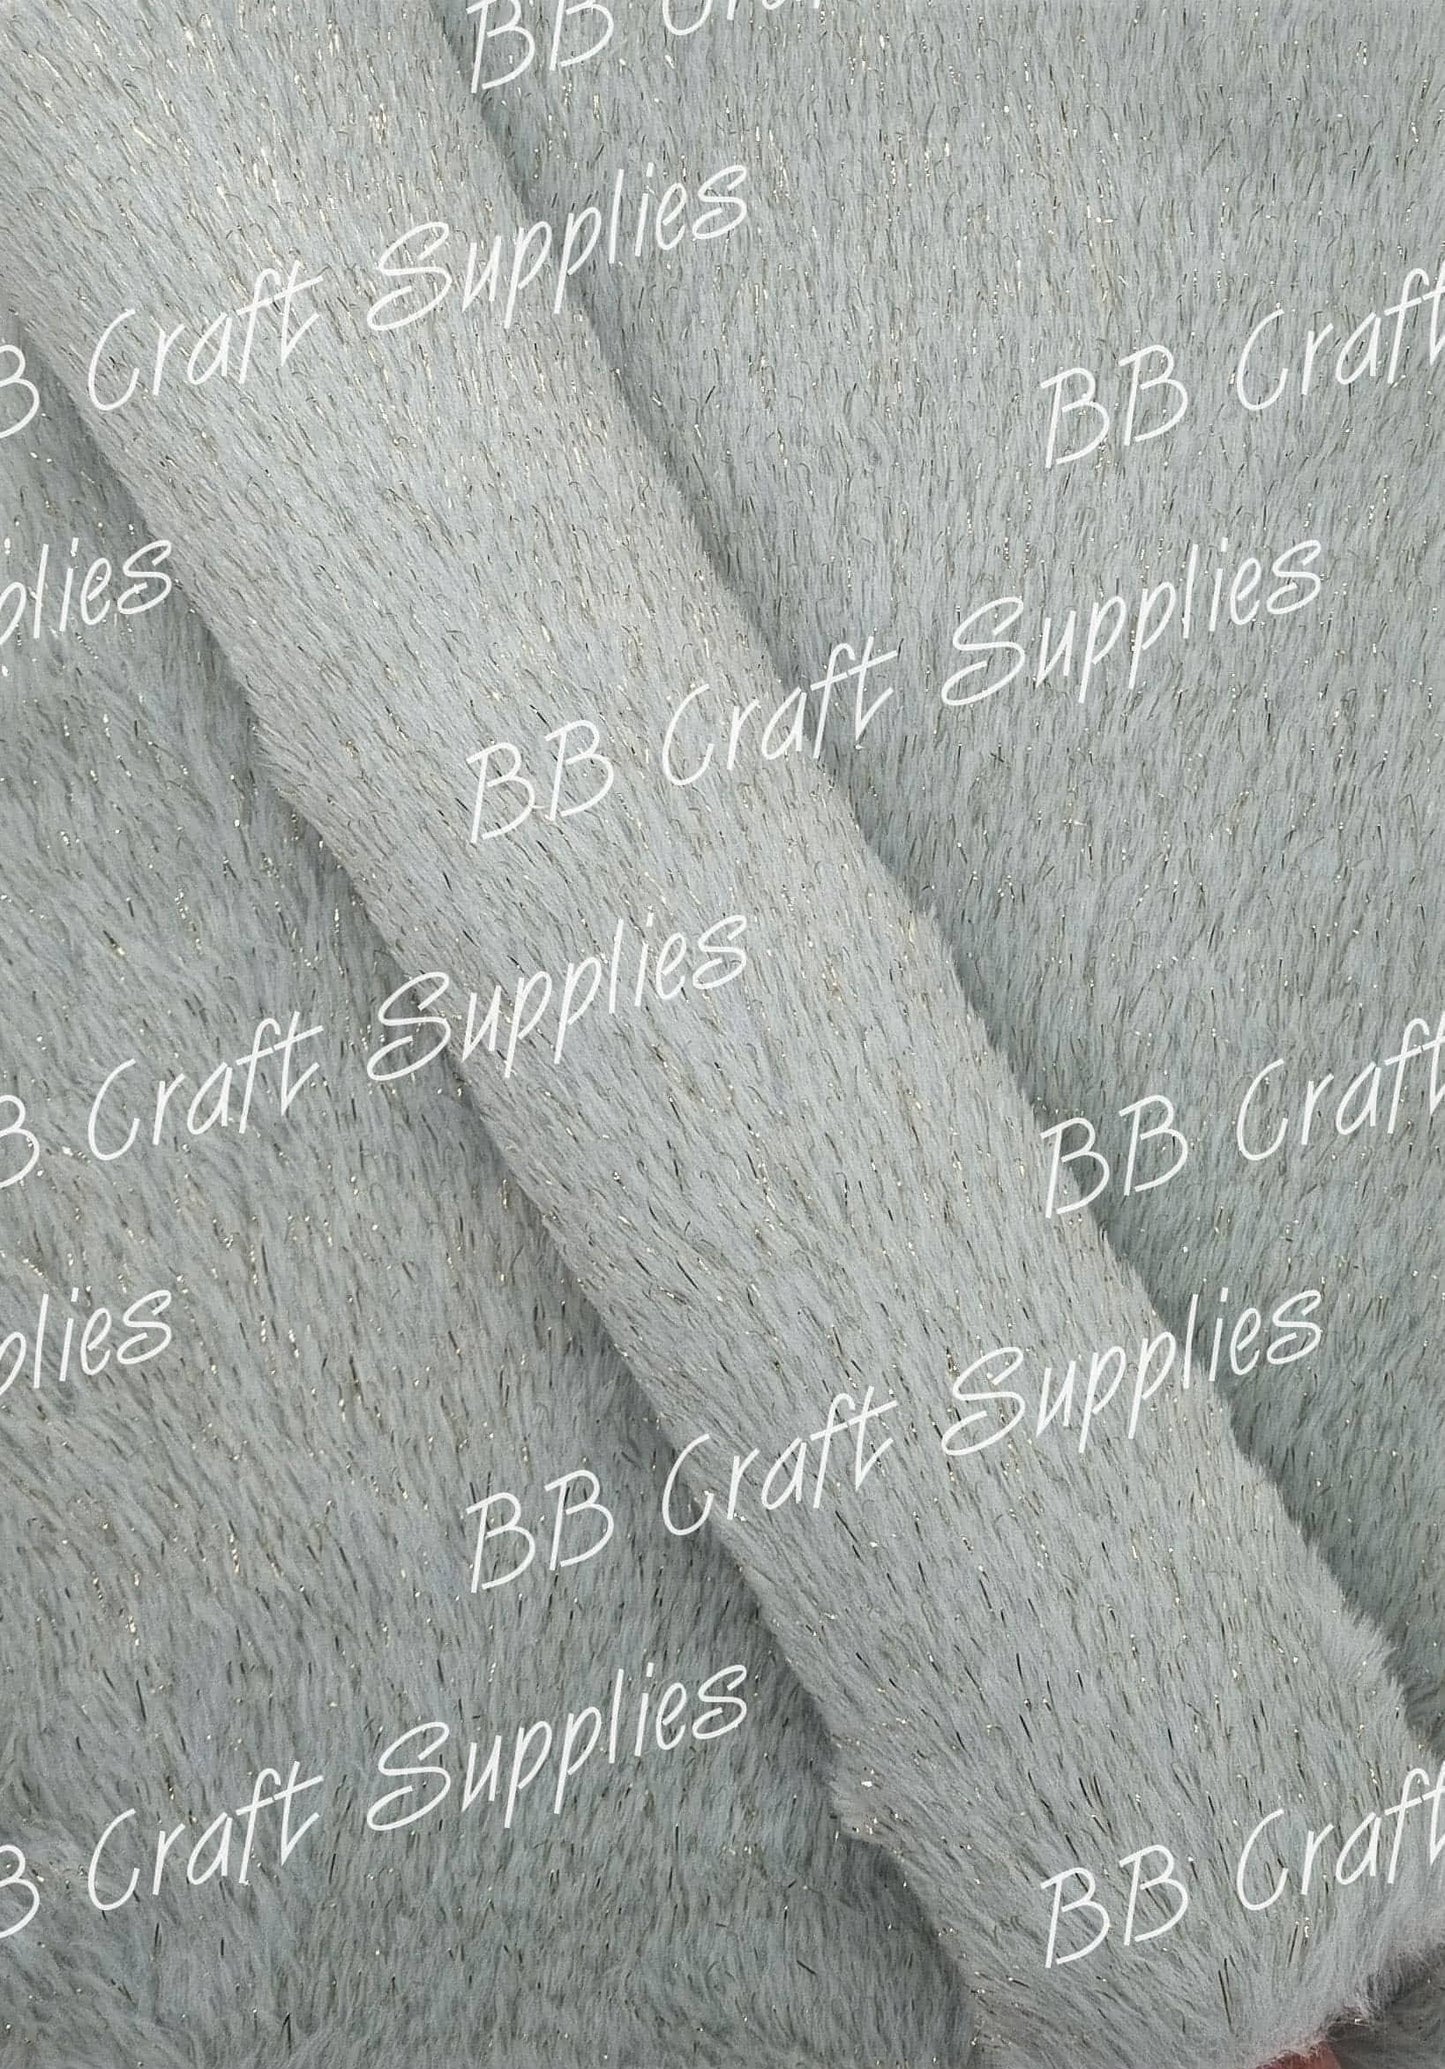 Faux Fur Fabric Grey with Gold Sparkles - easter, fabric, Faux, Faux Leather, fluffy, fur, gold, Grey, Rabbit - Bare Butler Faux Leather Supplies 